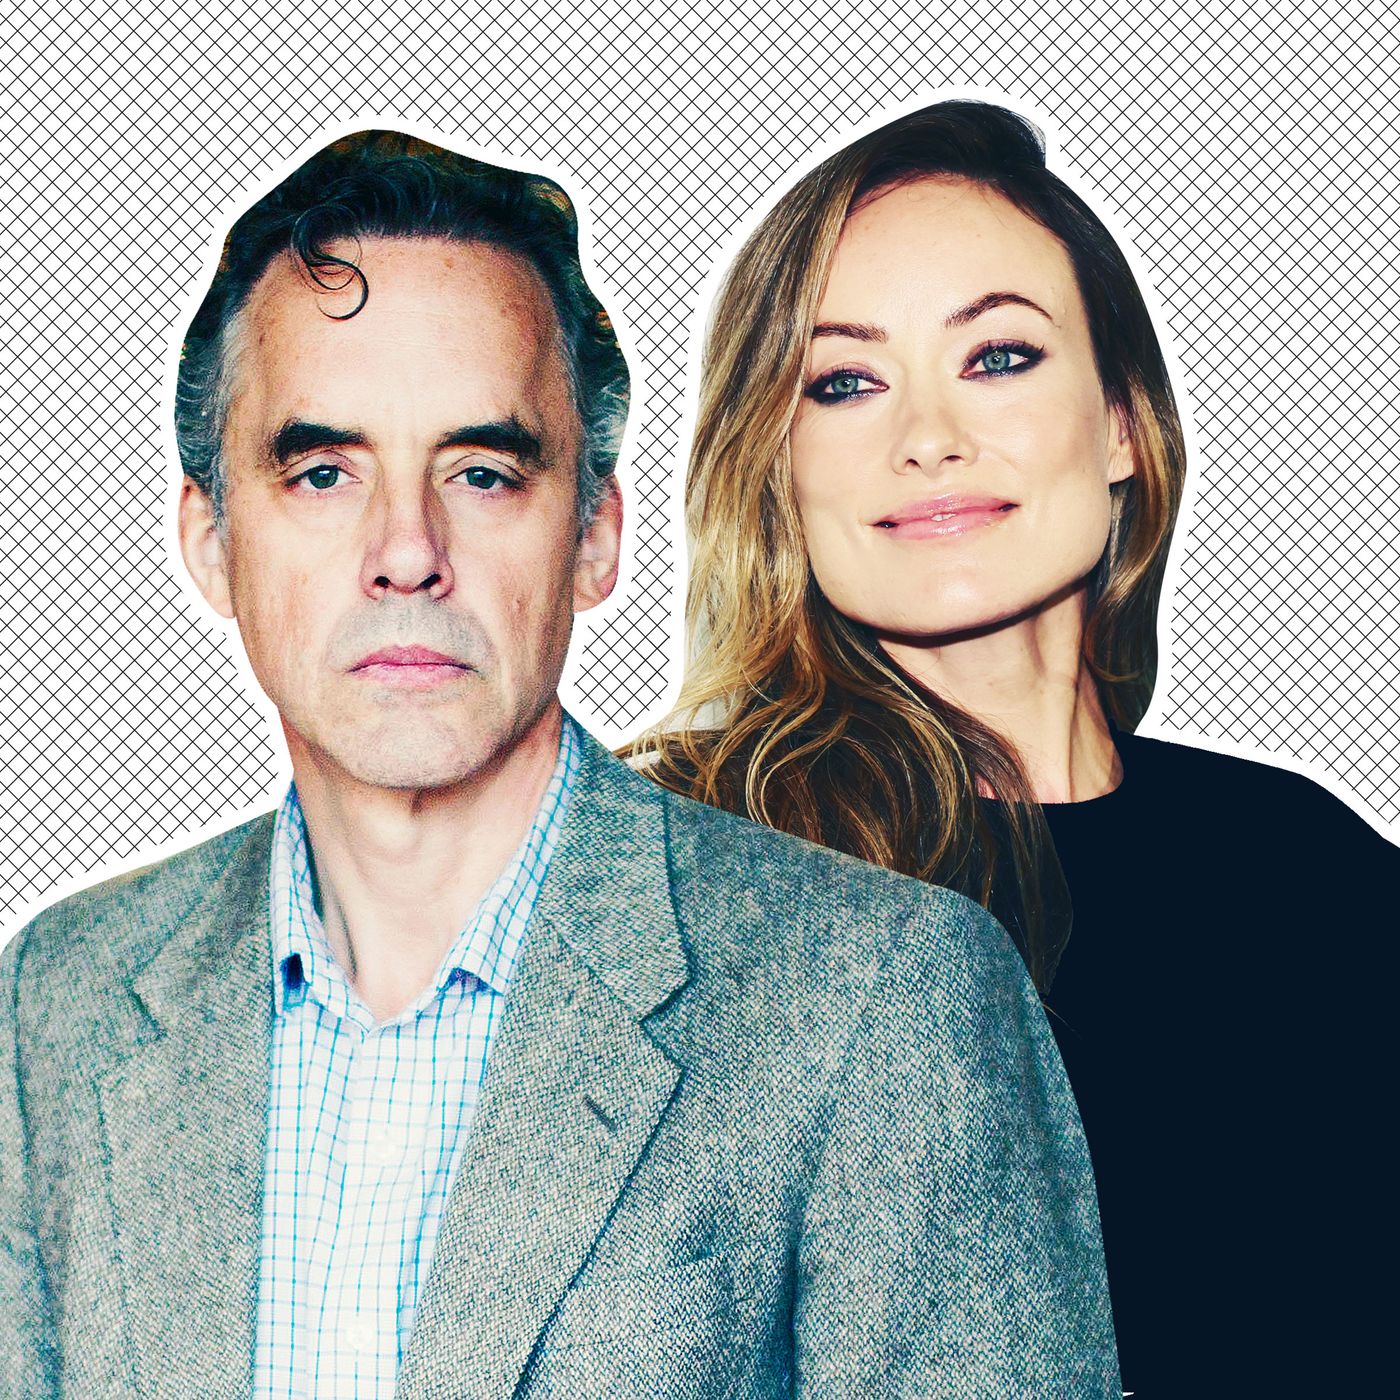 Don't Worry Darling: Jordan Peterson responds after Olivia Wilde says movie  character was based on him